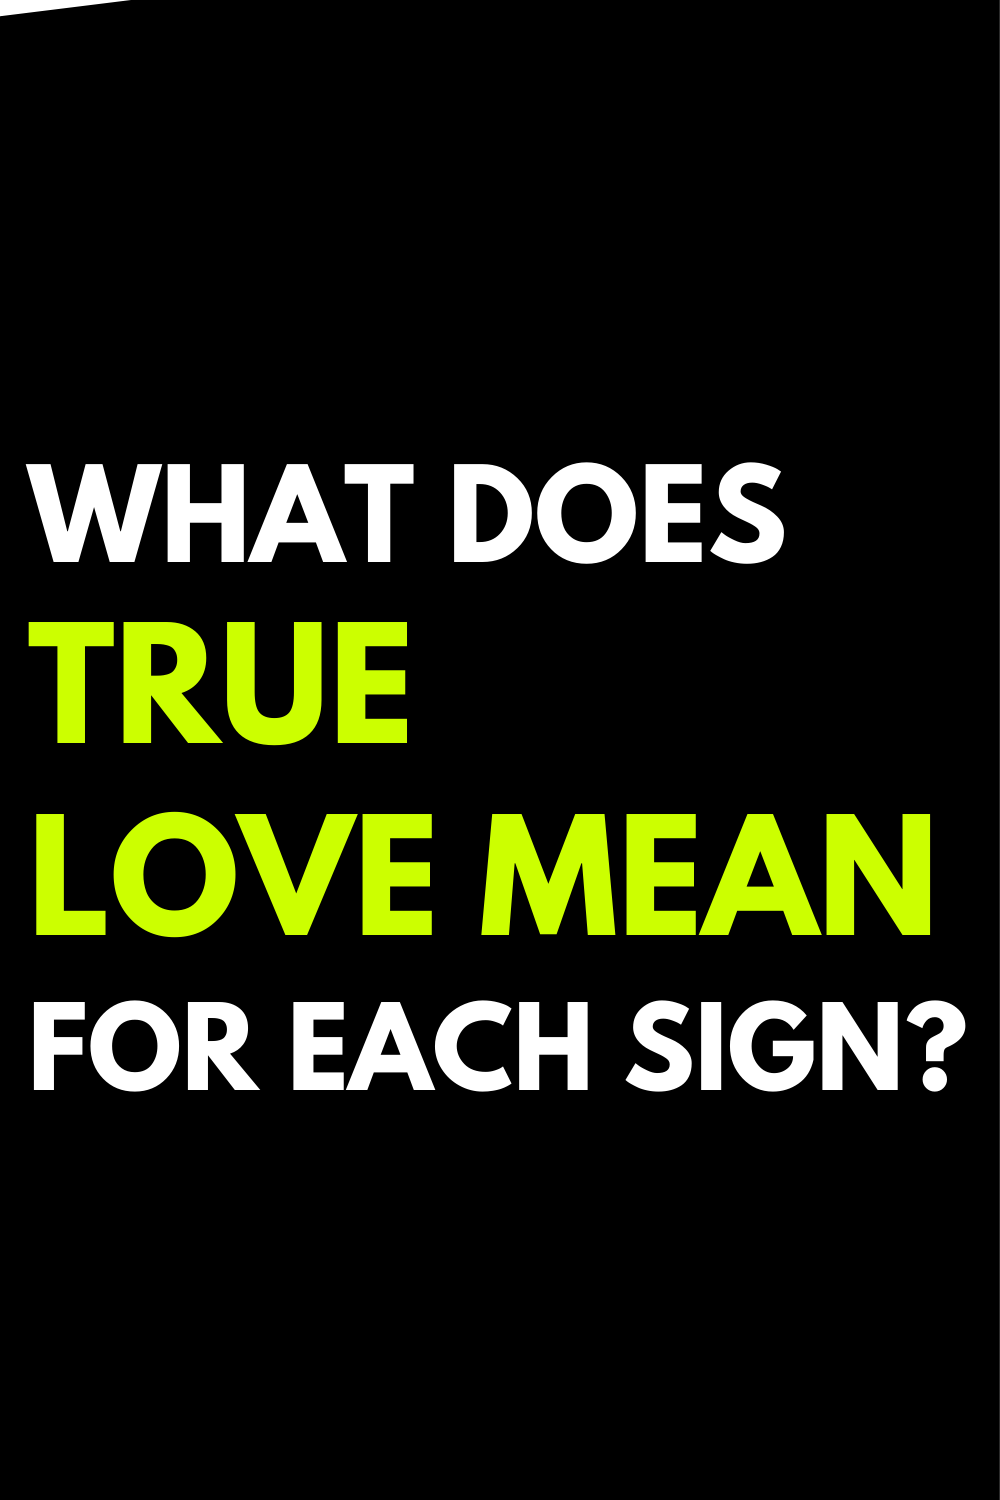 What does true love mean for each sign?